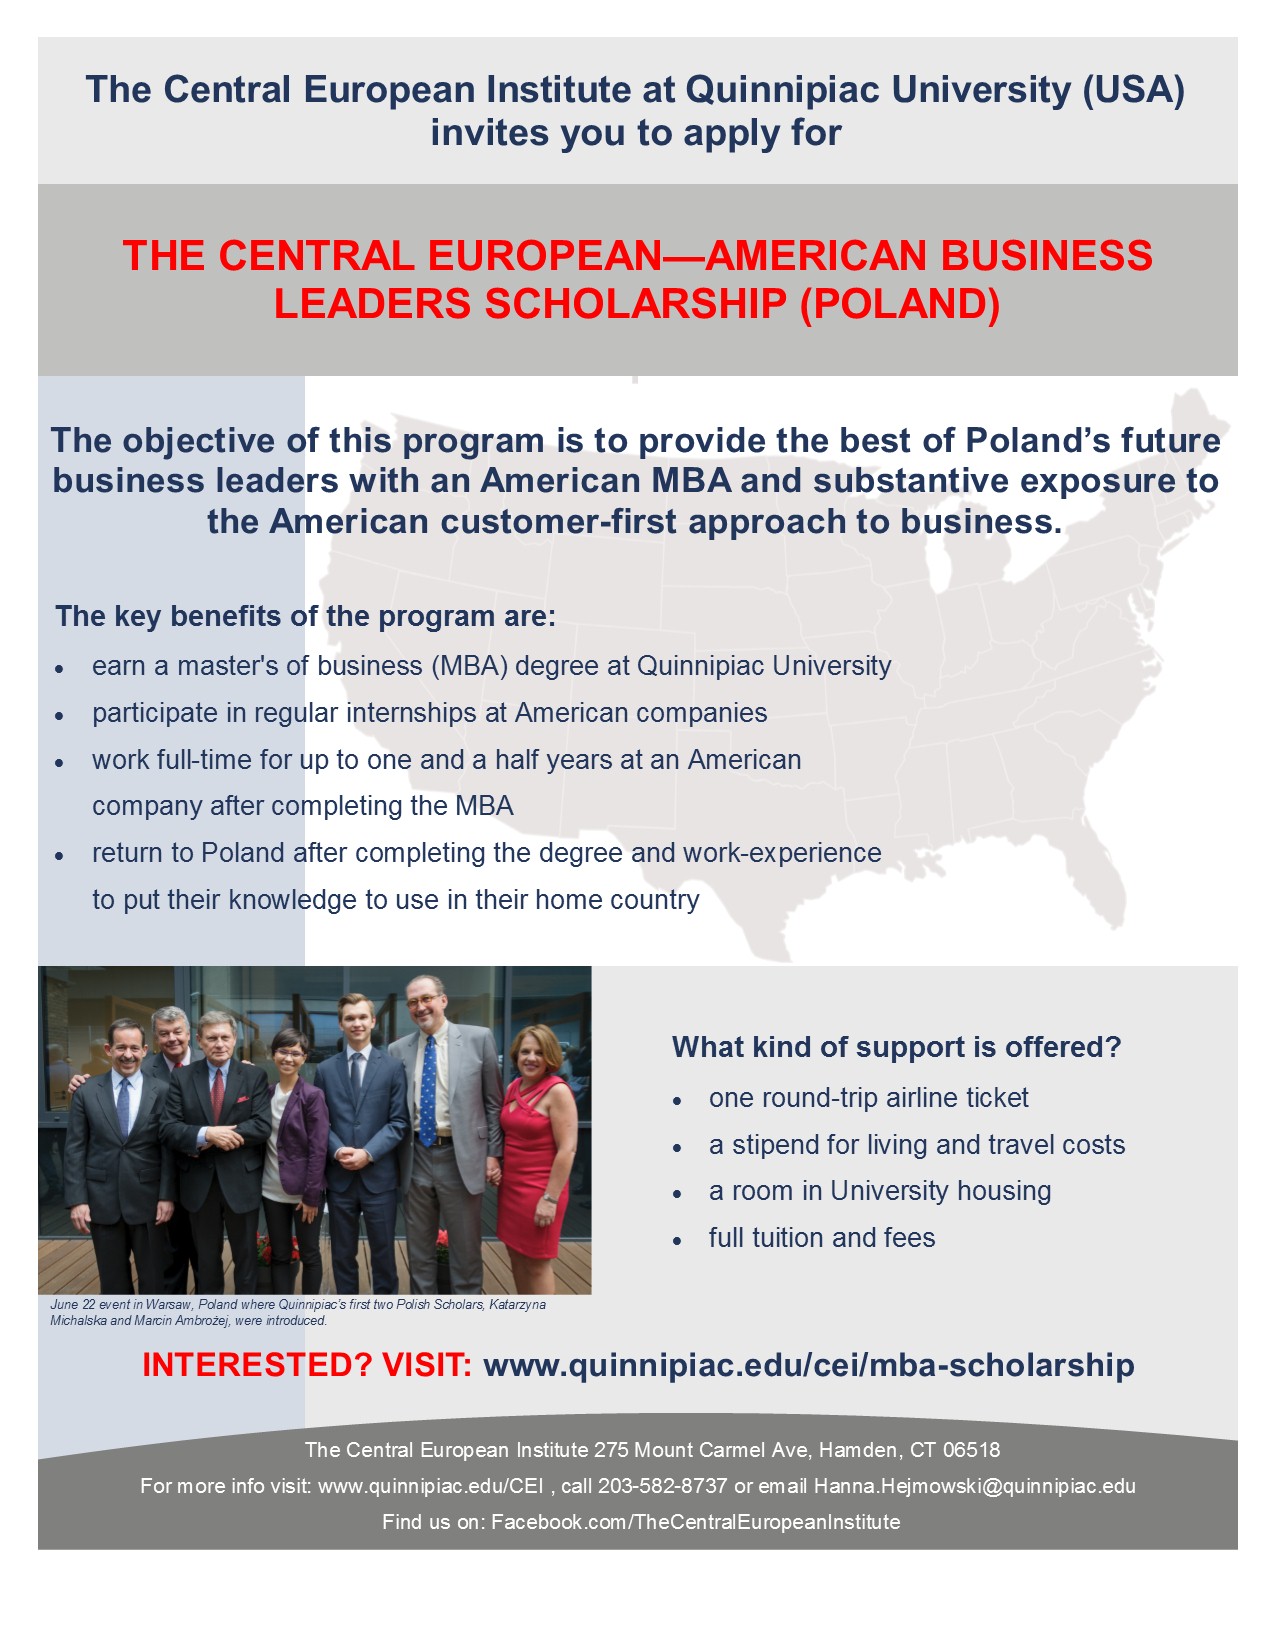 ce-american_business_leaders_scholarship_poster_1